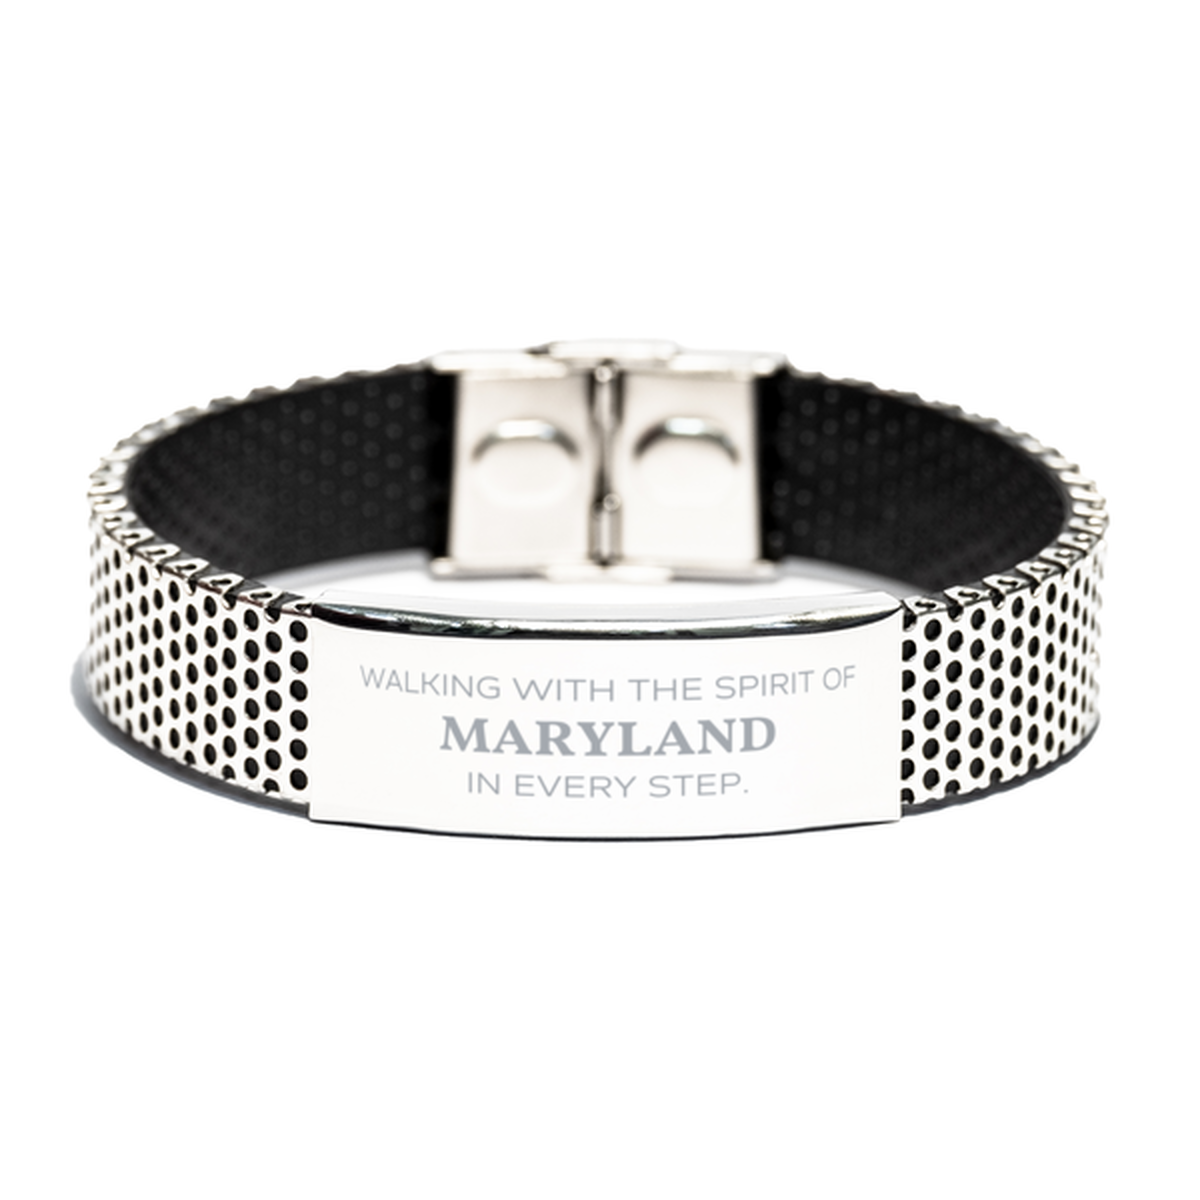 Maryland Gifts, Walking with the spirit, Love Maryland Birthday Christmas Stainless Steel Bracelet For Maryland People, Men, Women, Friends